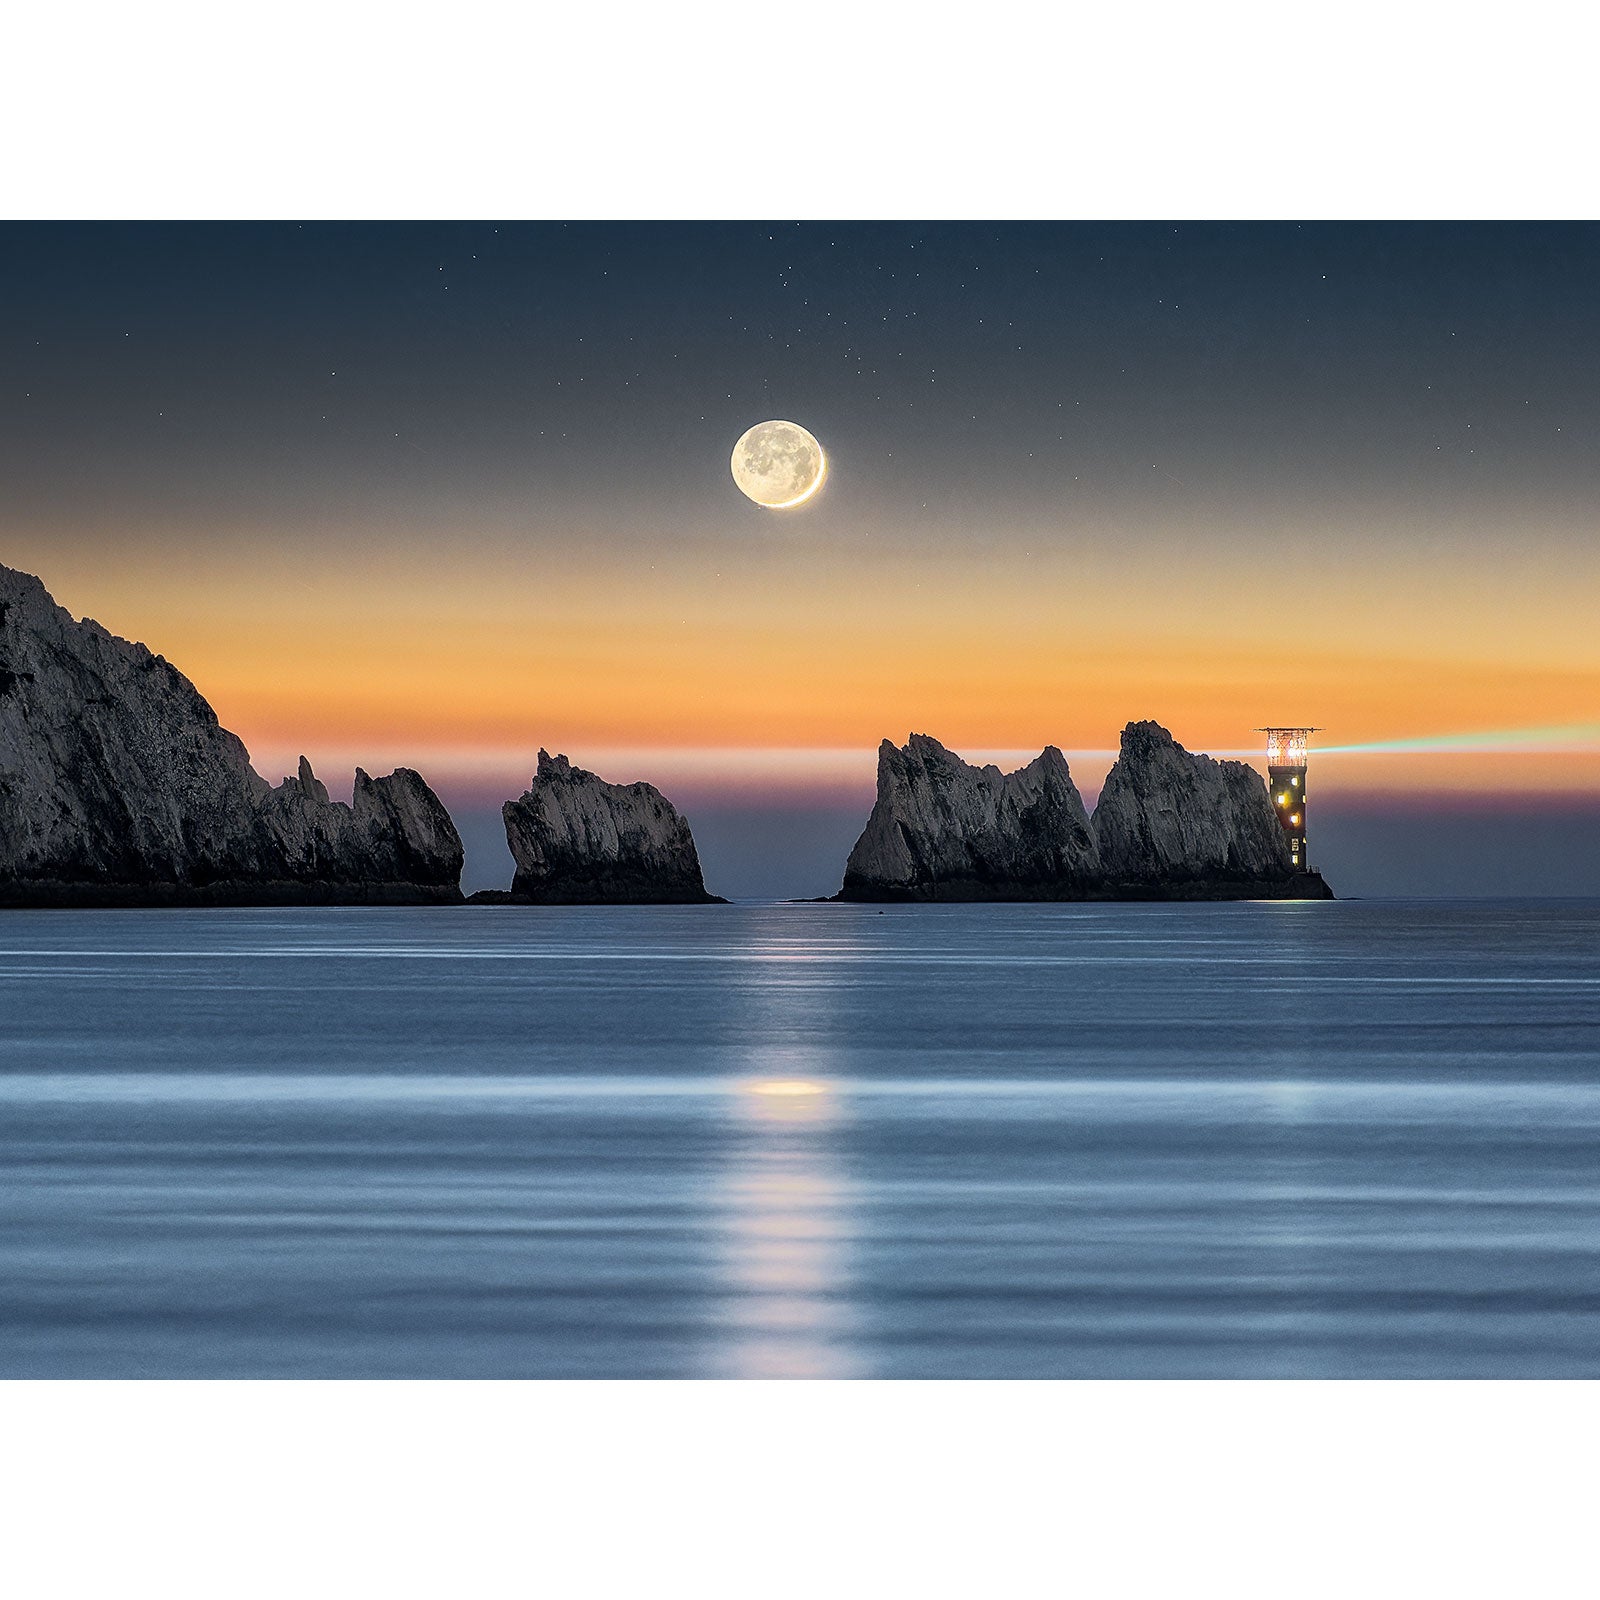 Full Crescent Moon over a tranquil sea with cliff formations and a lighthouse on Gascoigne Isle captured by Available Light Photography.